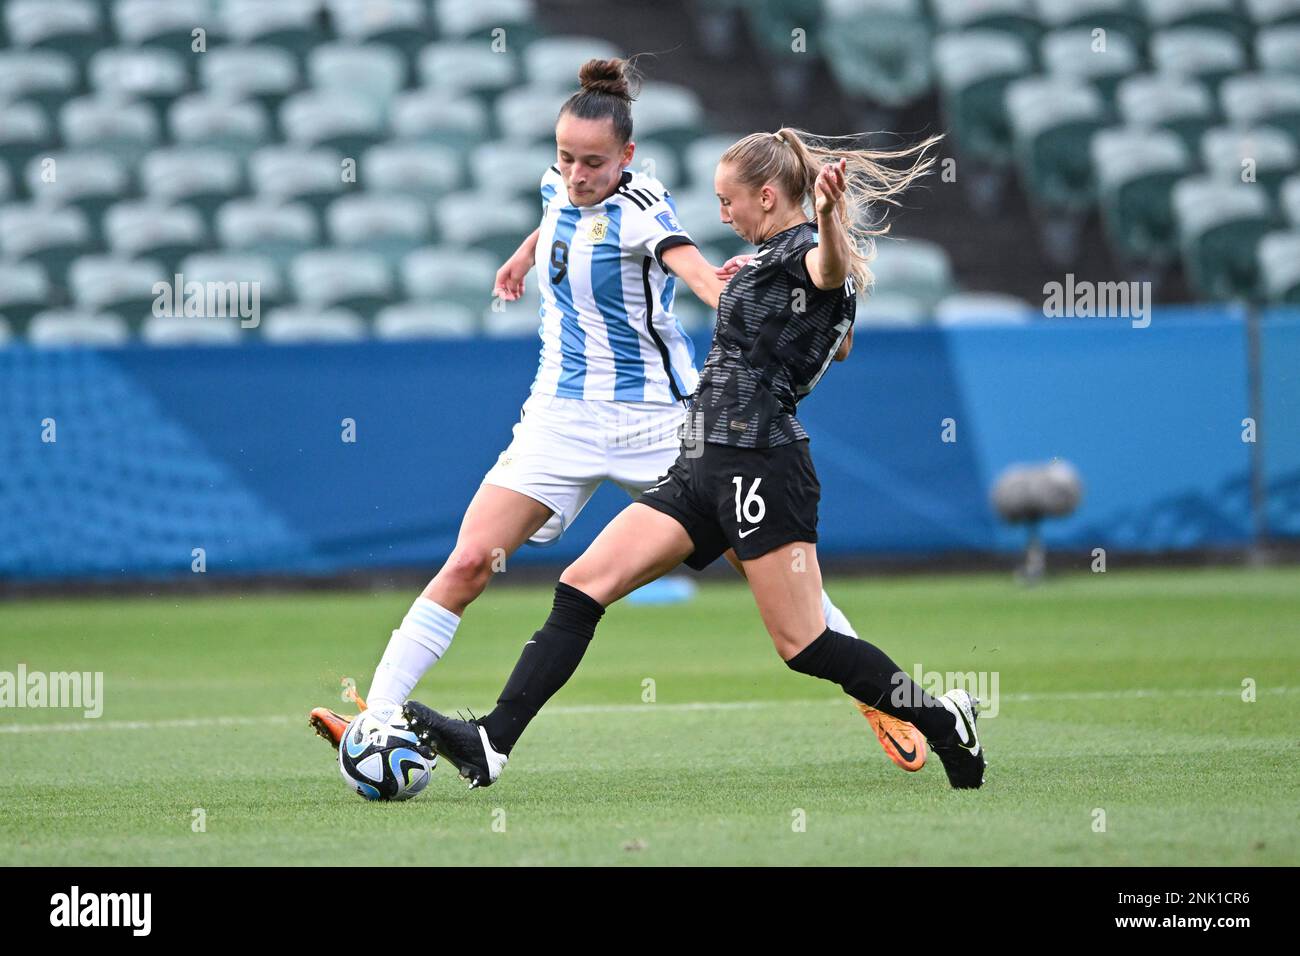 Auckland, New Zealand. 23rd Feb, 2023. Paulina Gramaglia (L) of Argentina National Women's soccer team and Grace Neville (R) of New Zealand National Women's soccer team in action during the FIFA Women's World Cup 2023 friendly game between Argentina and New Zealand held at the North Harbour Stadium. Final score: Argentina 1:0 New Zealand. Credit: SOPA Images Limited/Alamy Live News Stock Photo